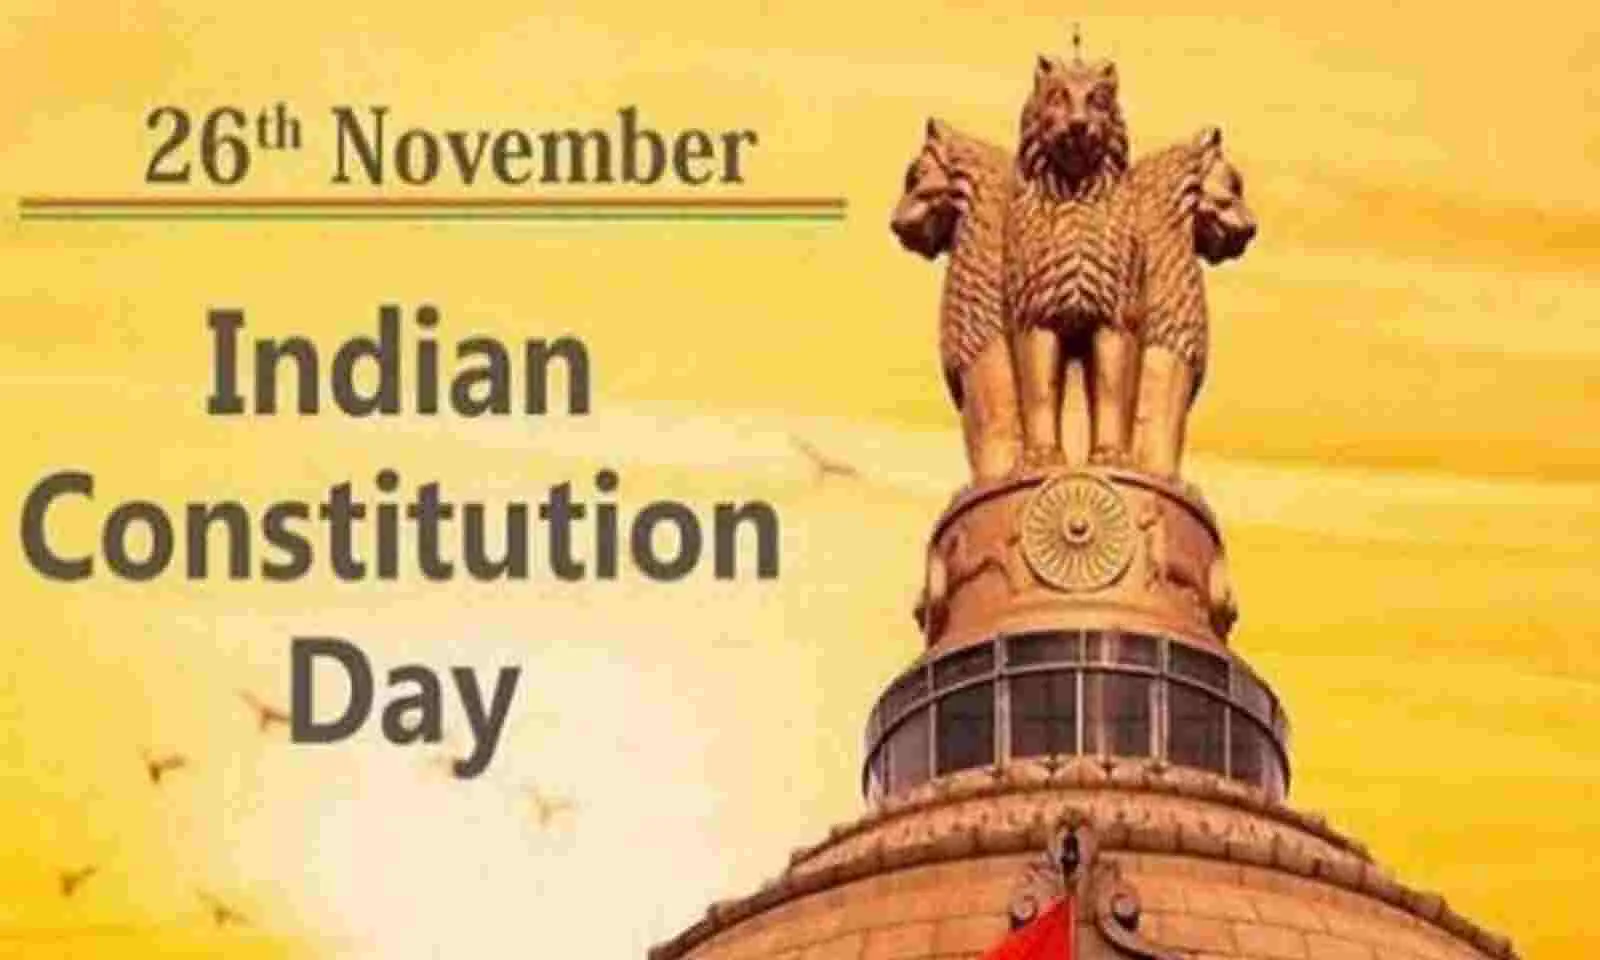 Constitution Day of India: History & Significance